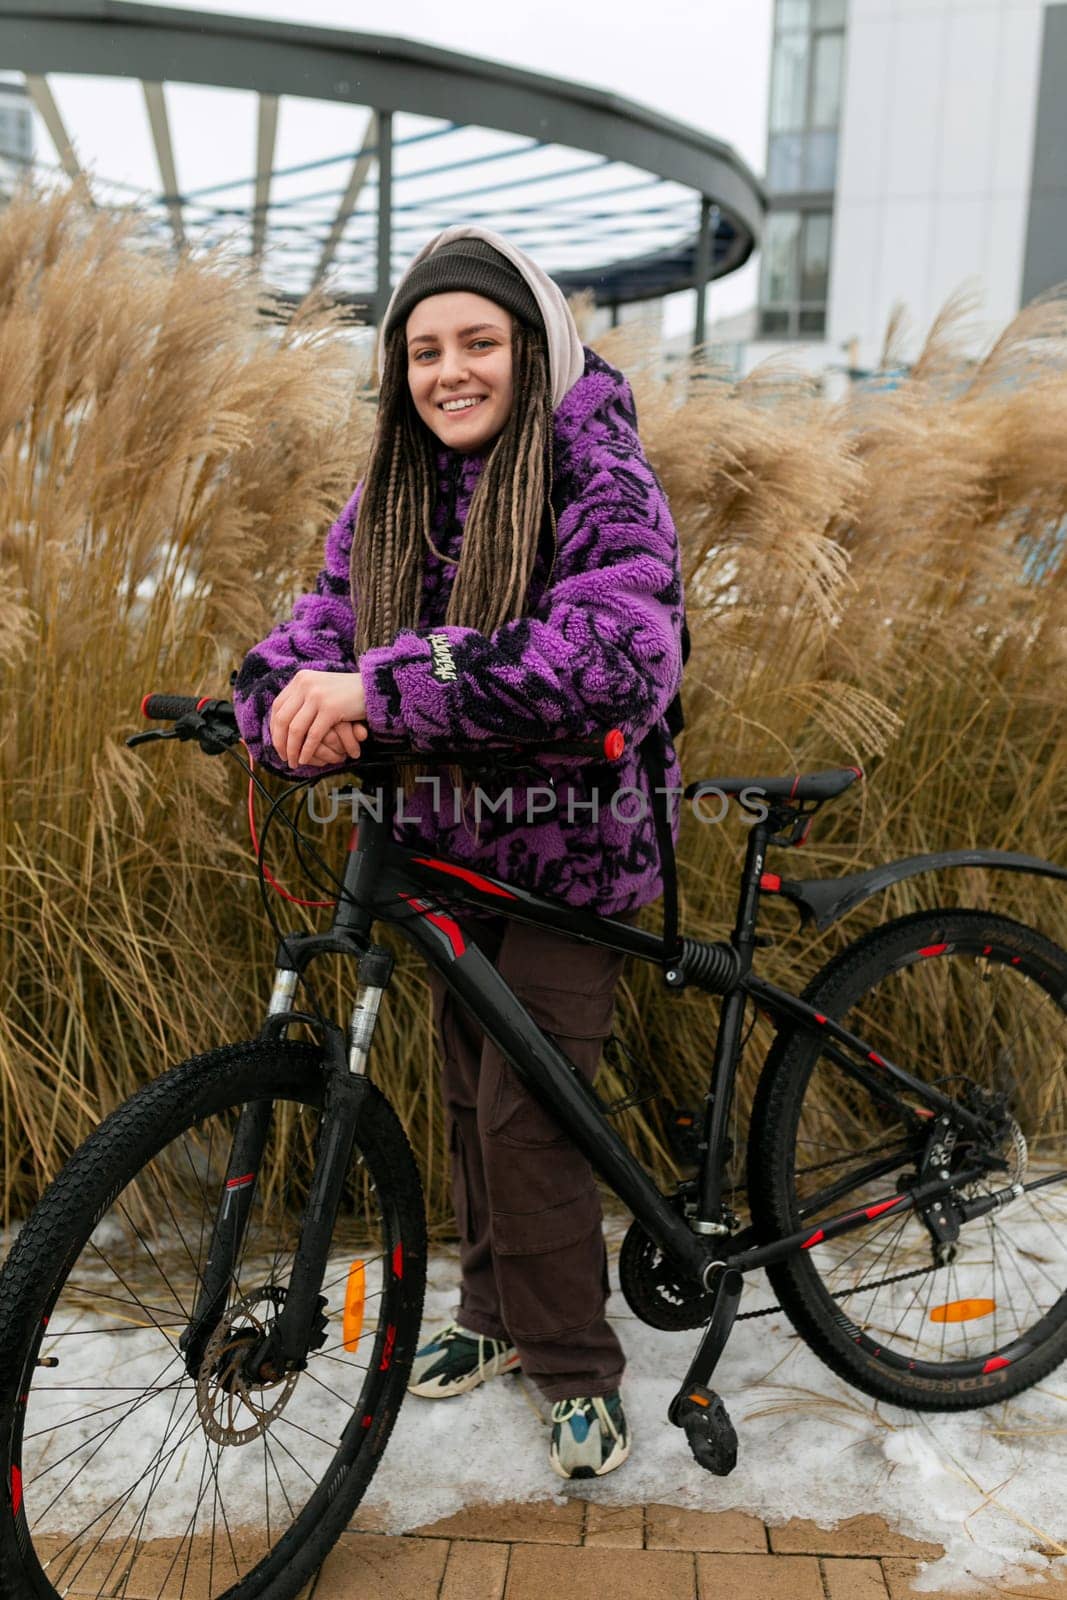 Bicycle rental concept. Young woman with dreadlocks rides a bicycle in the city.